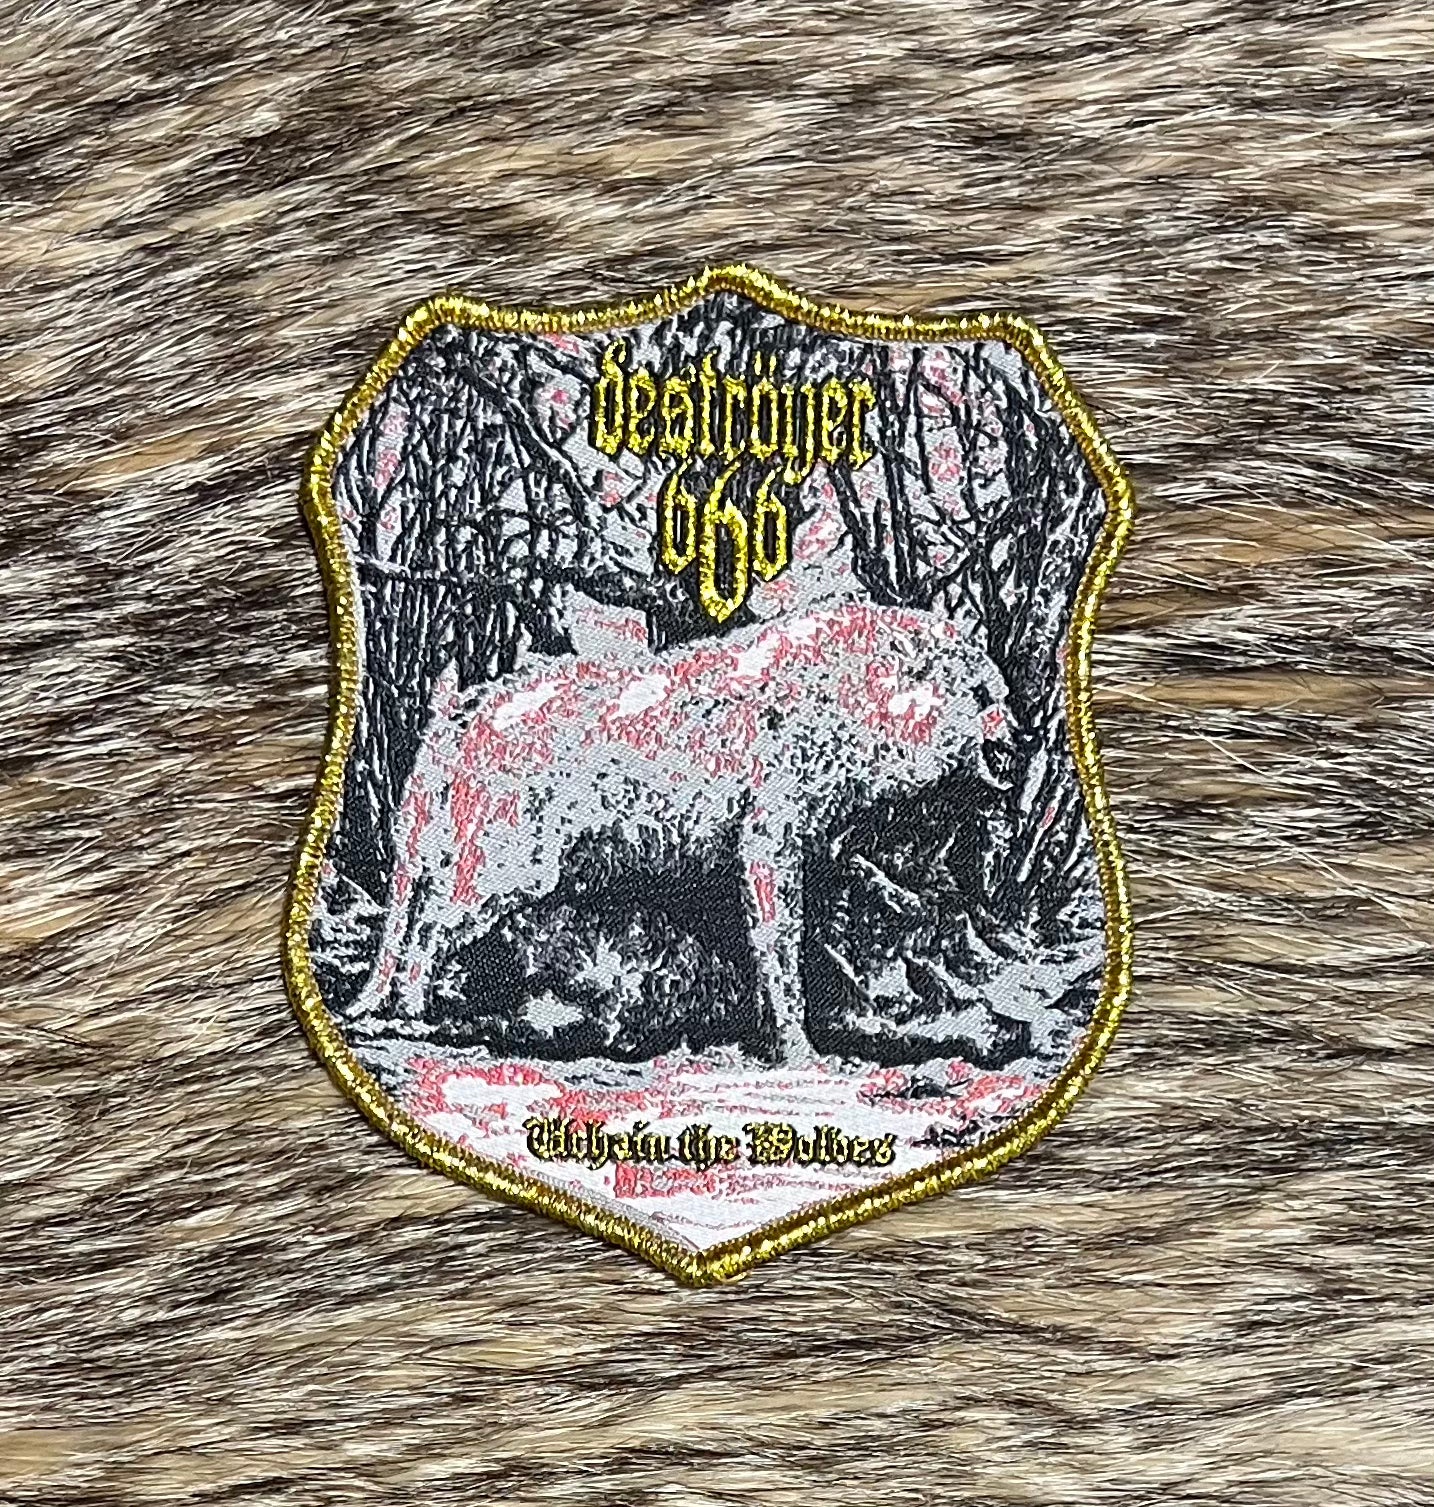 Destroyer 666 - Unchain The Wolves Patch